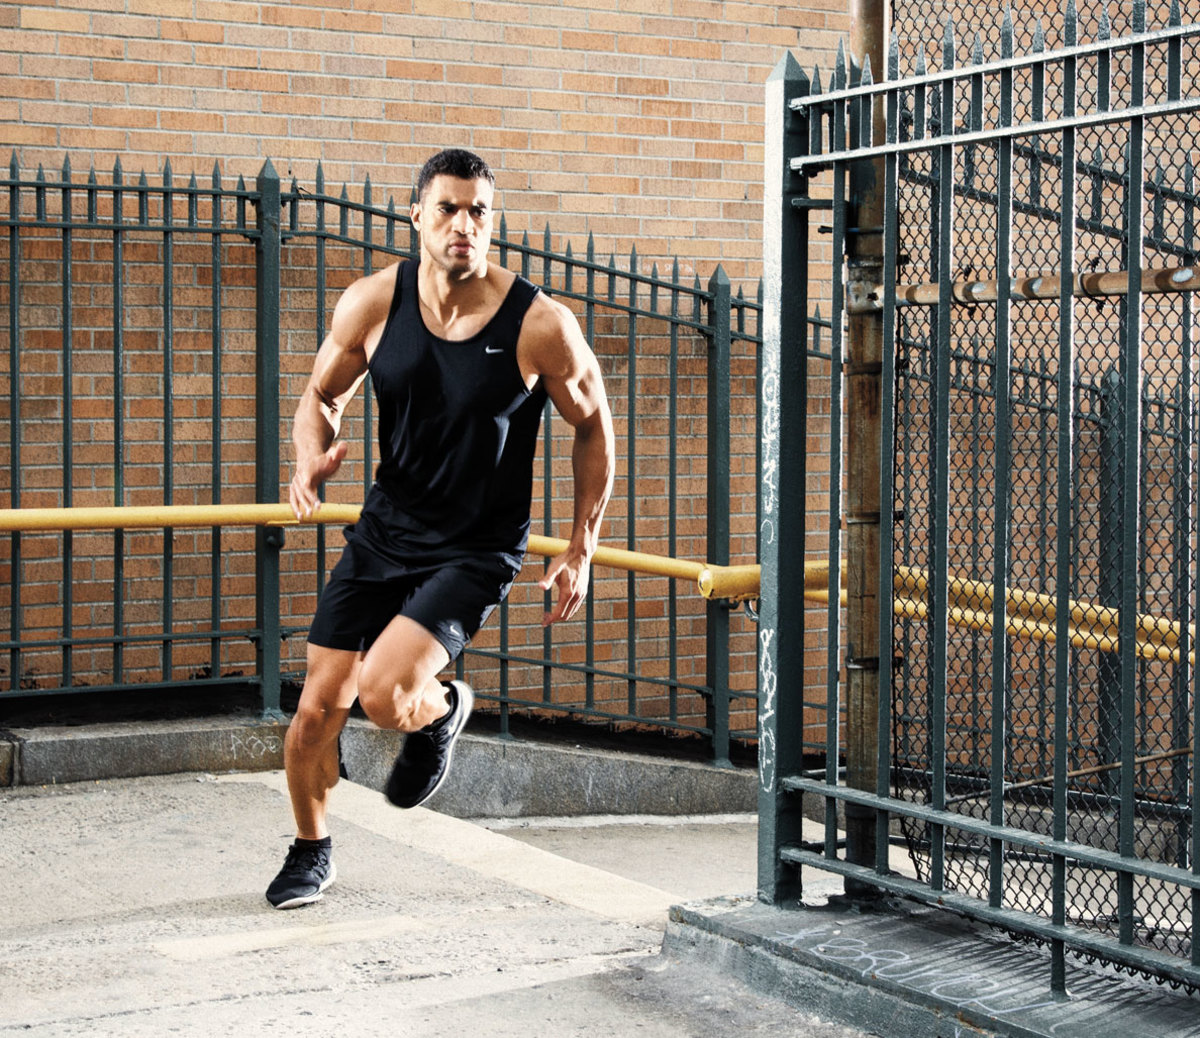 Outdoor Workouts to Burn Fat and Build Muscle